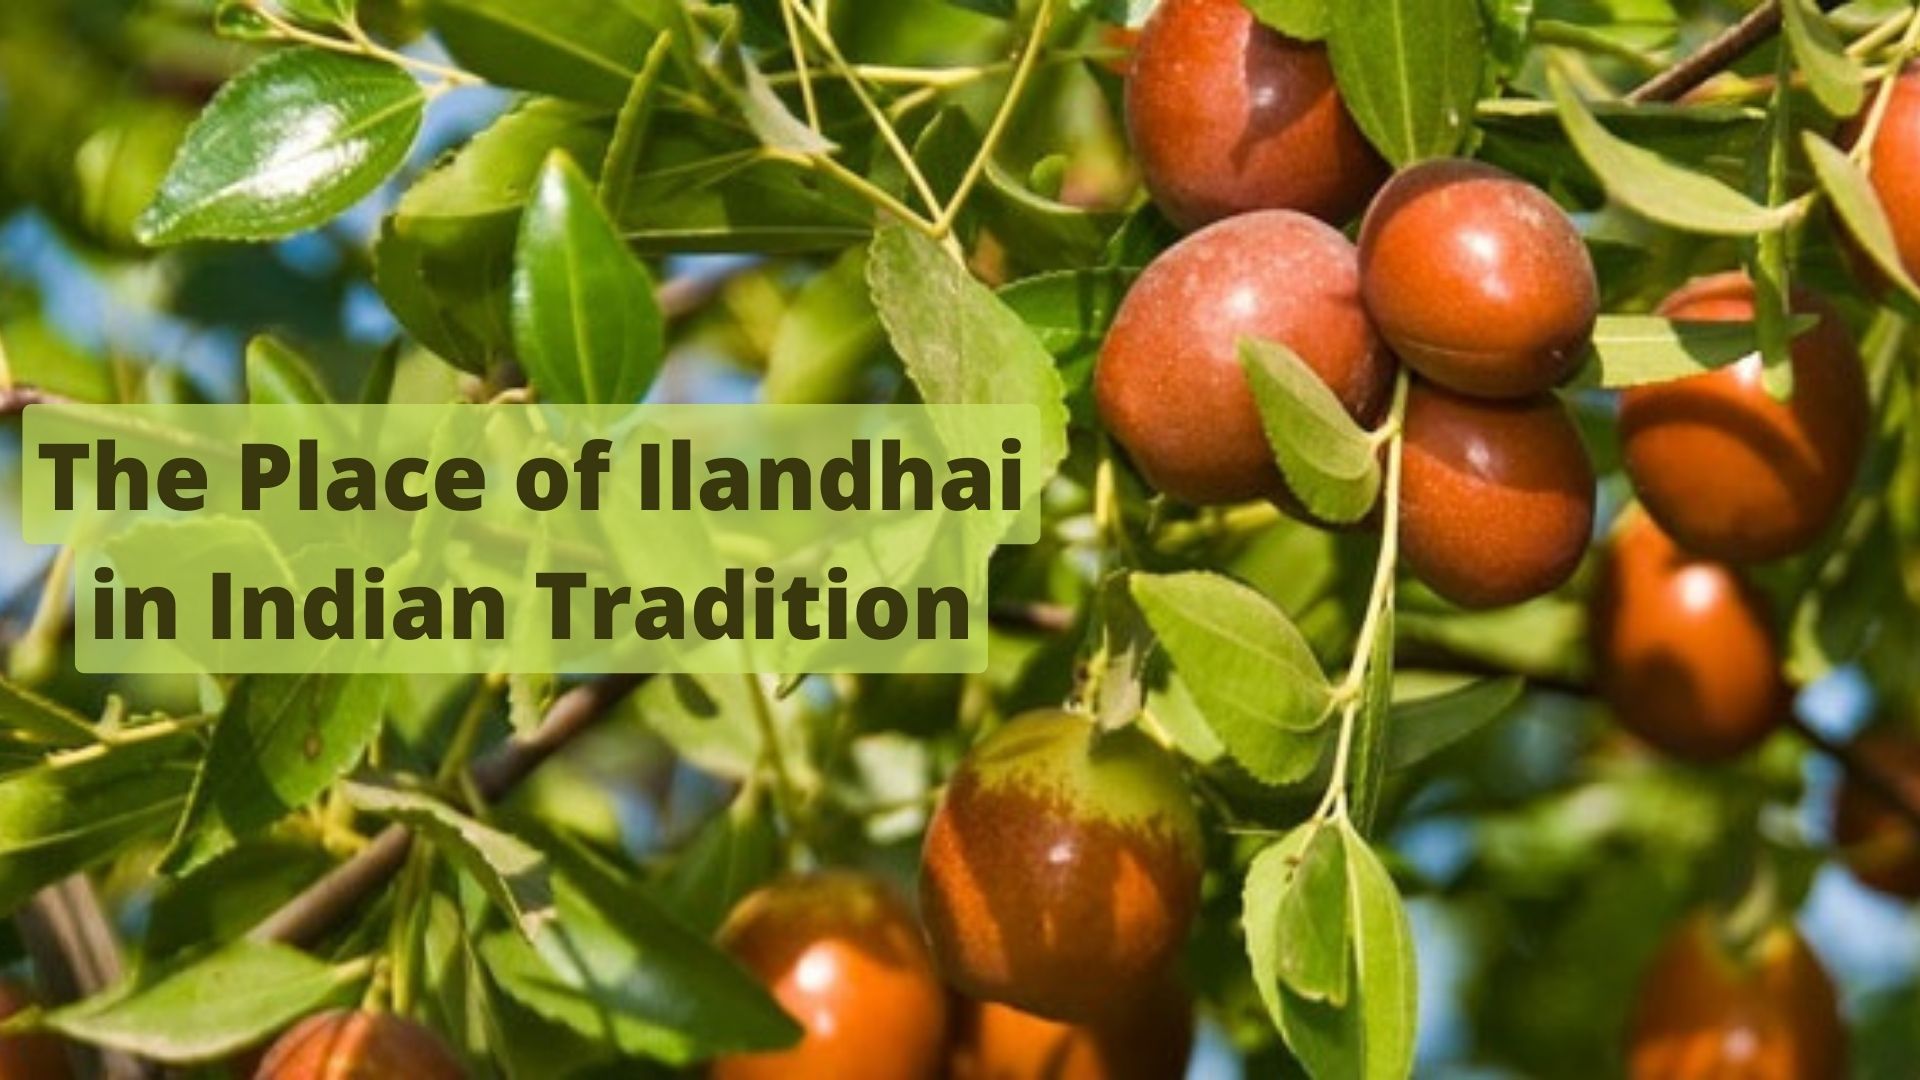 The Place of Ilandhai in Indian Tradition